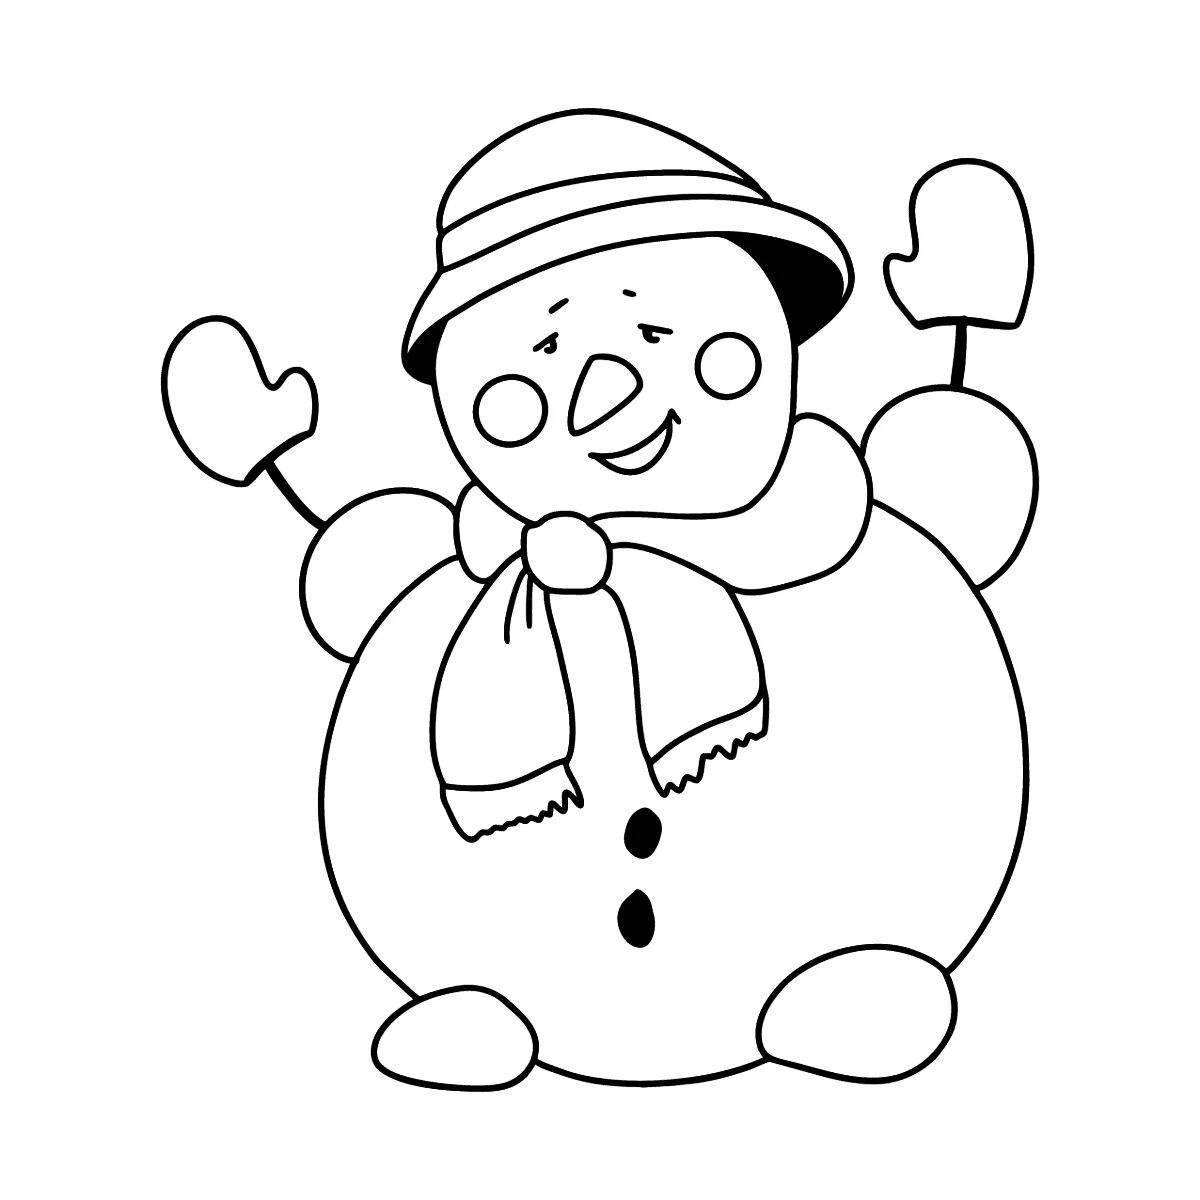 Holiday snowman coloring book for kids 5 6